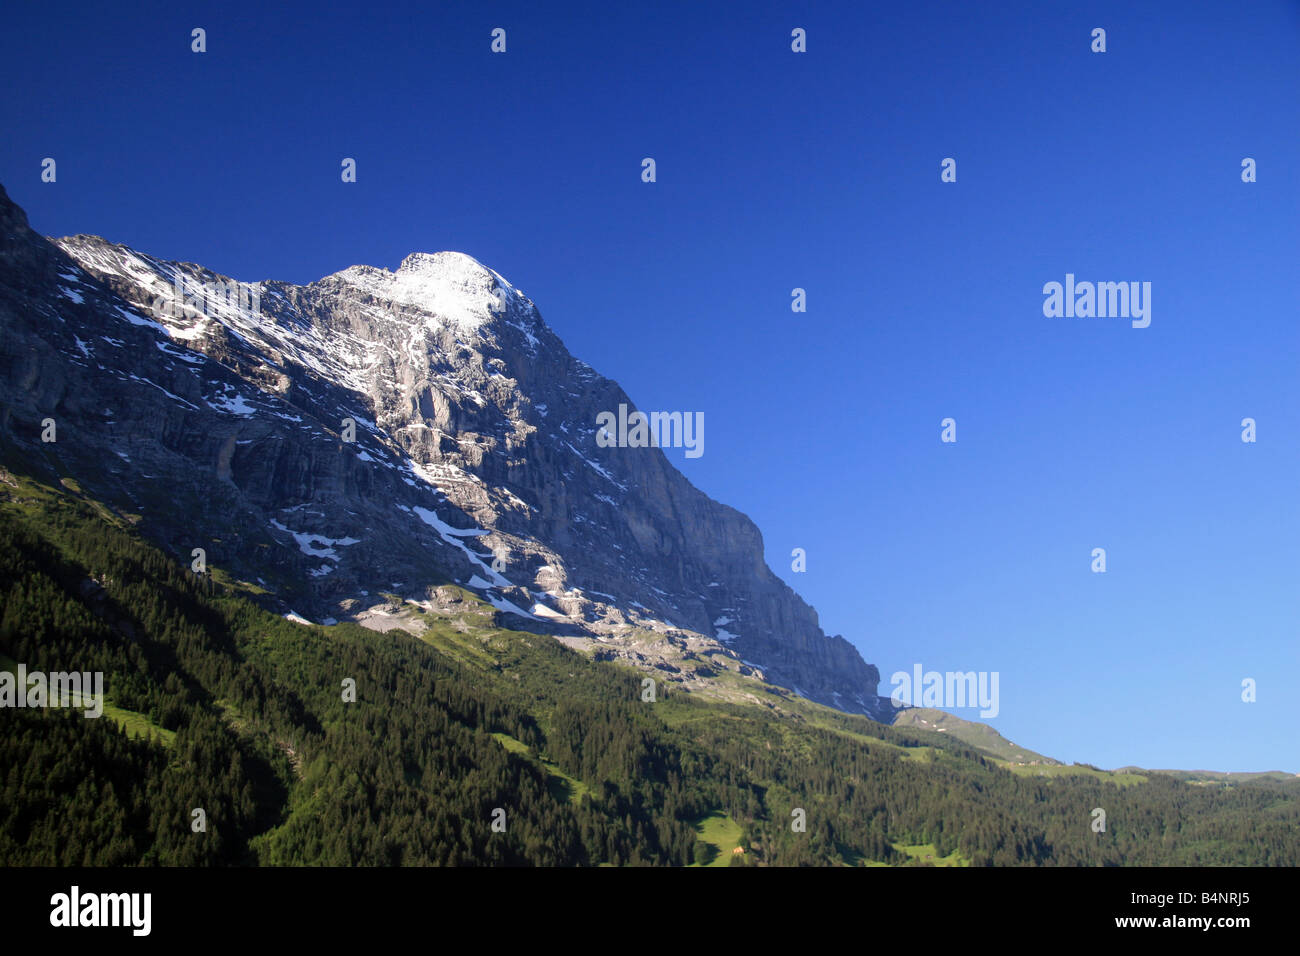 The north face of the Eiger as seen from Grindelwald, Jungfrau Region, southern Switzerland. Stock Photo